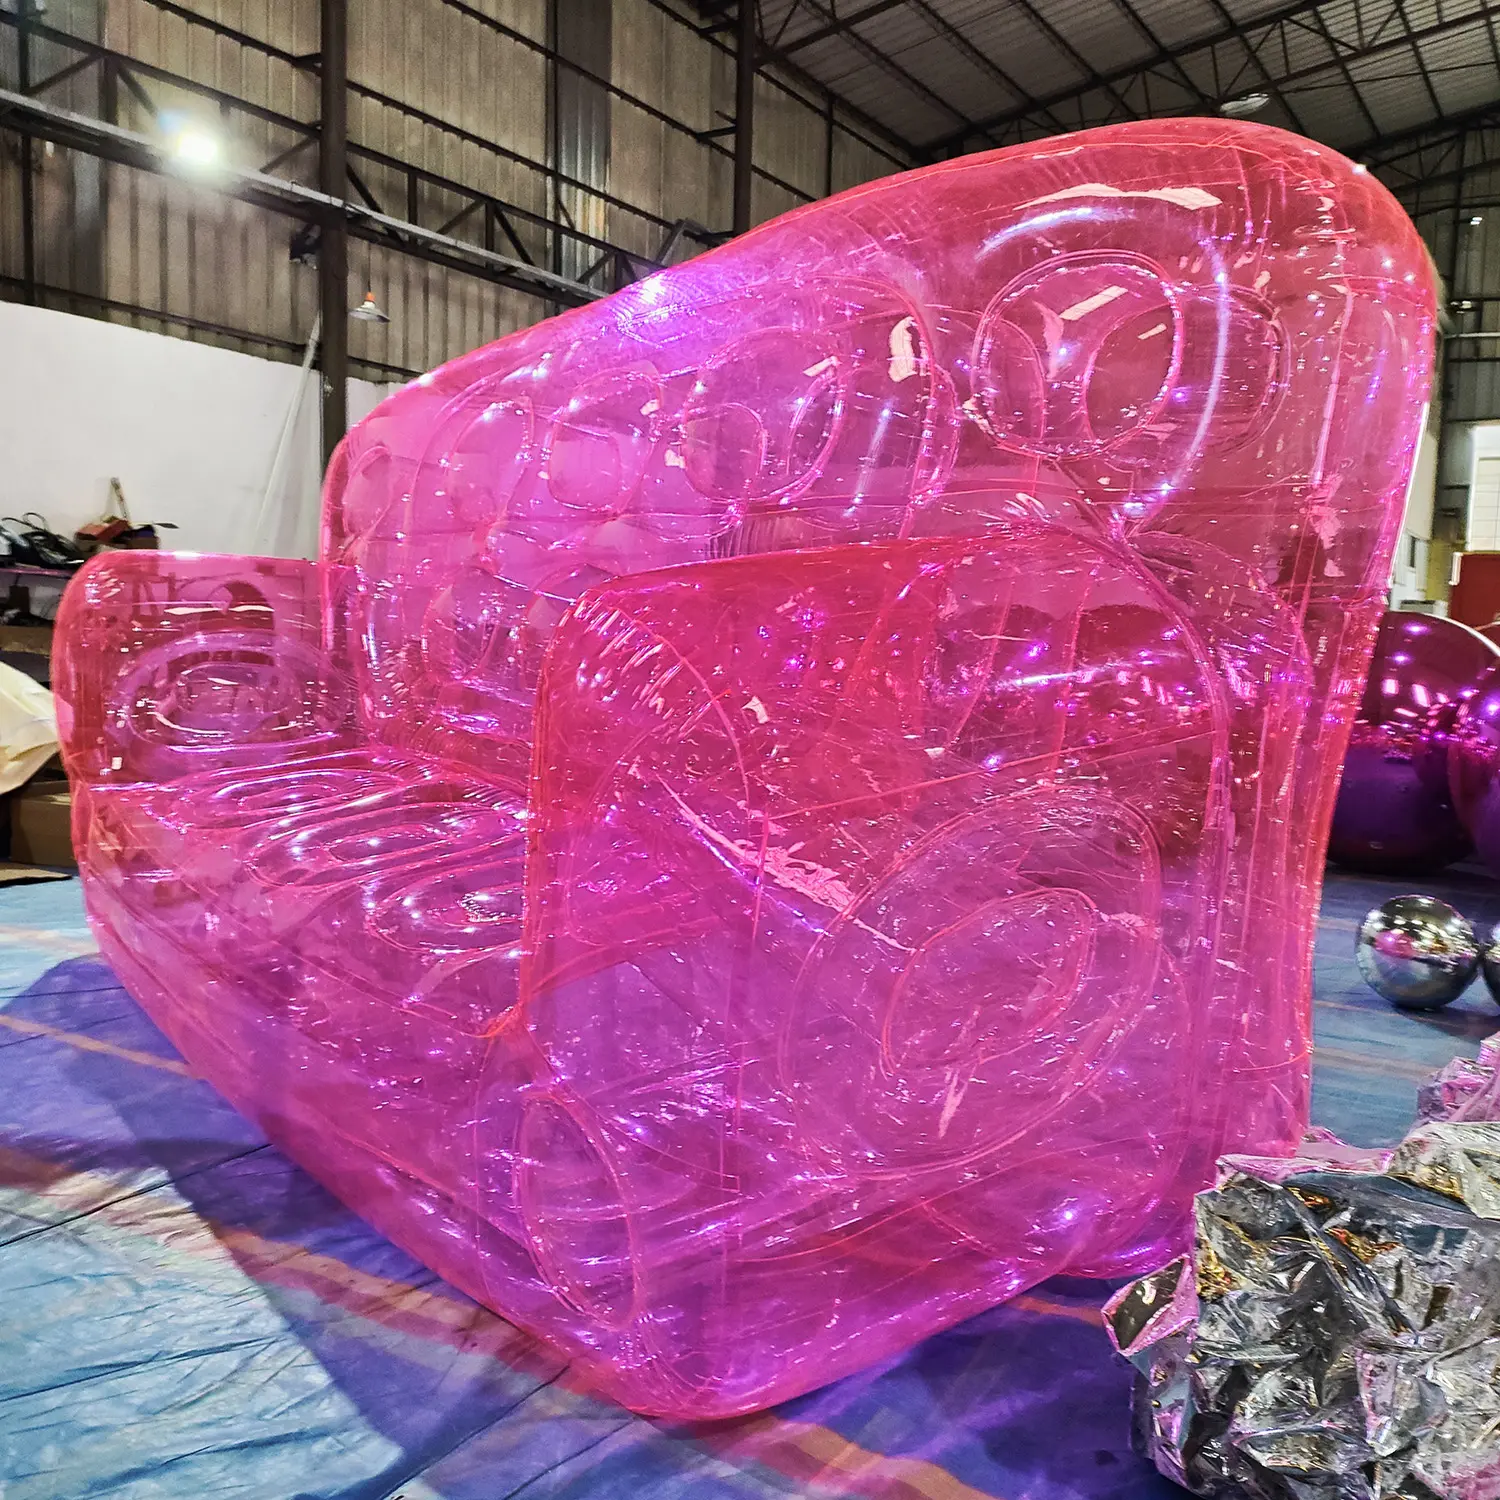 The huge 10m inflatable sofa inflatable decoration model supports customization